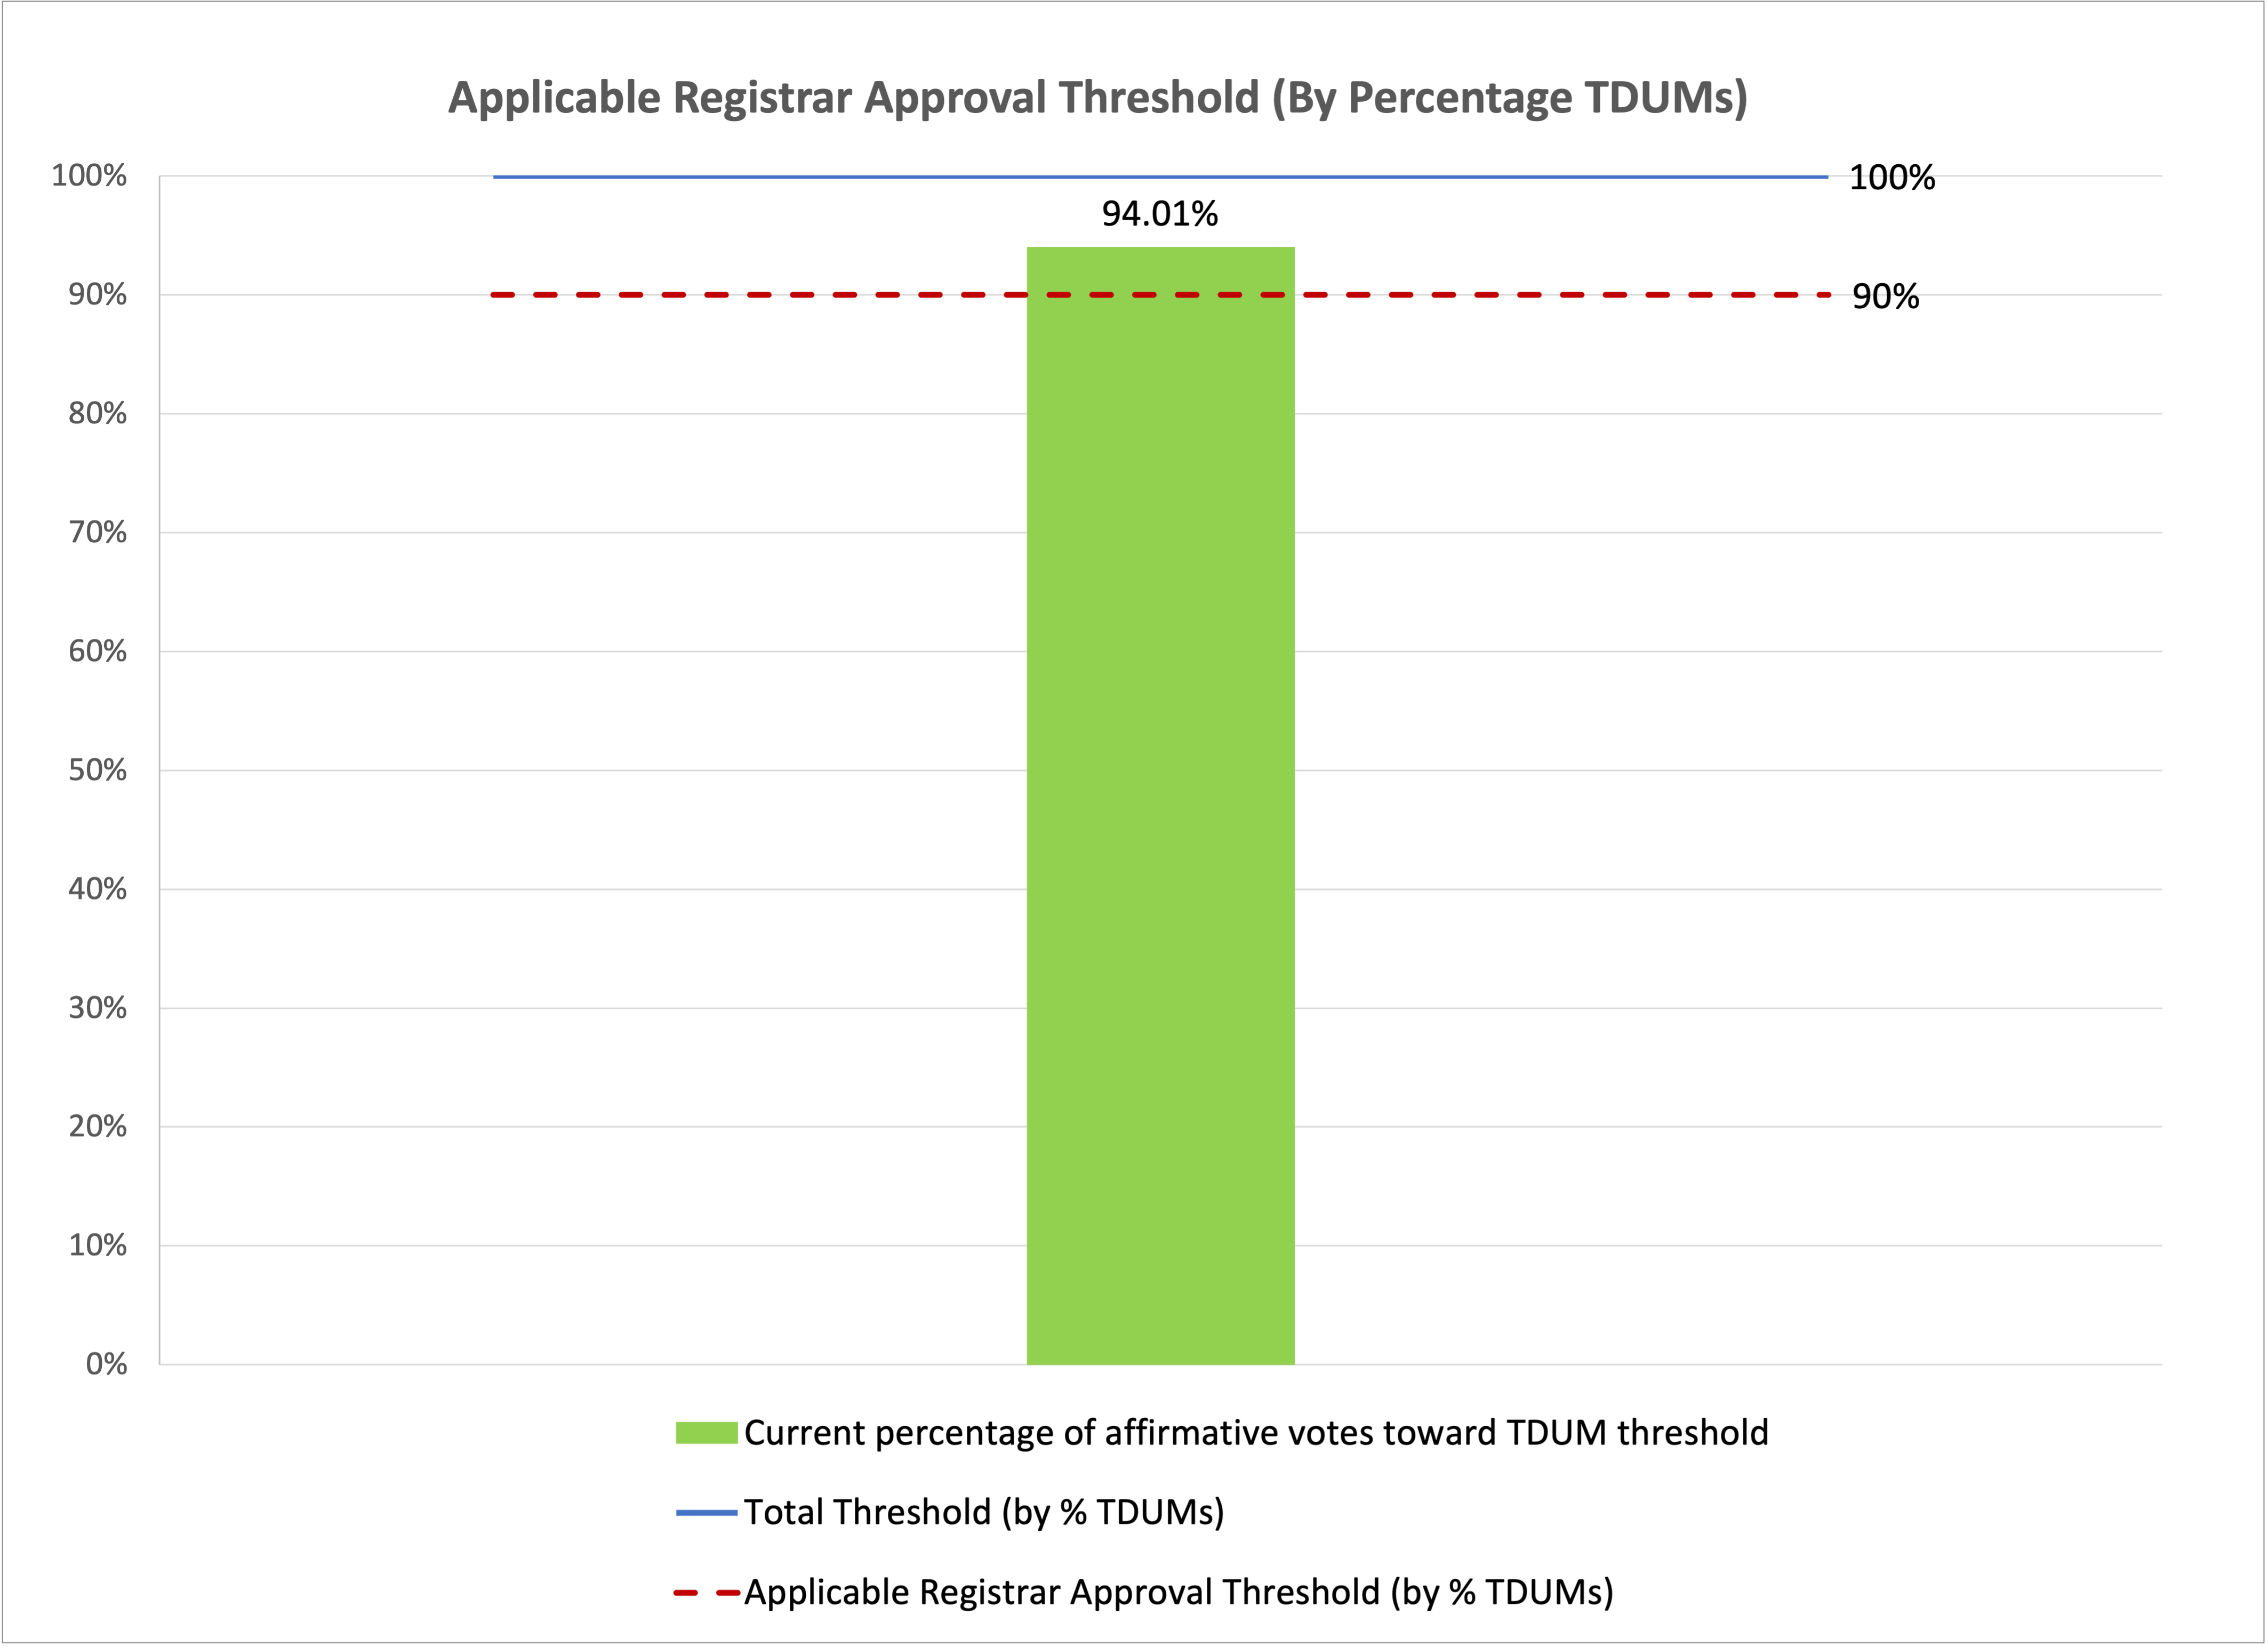 Bar chart of the progress of the vote towards meeting the percentage of total domain names under management (TDUMs) threshold for Applicable Registrars. The TDUMs approval threshold is 90%, with current affirmative votes towards the threshold at 94.01%